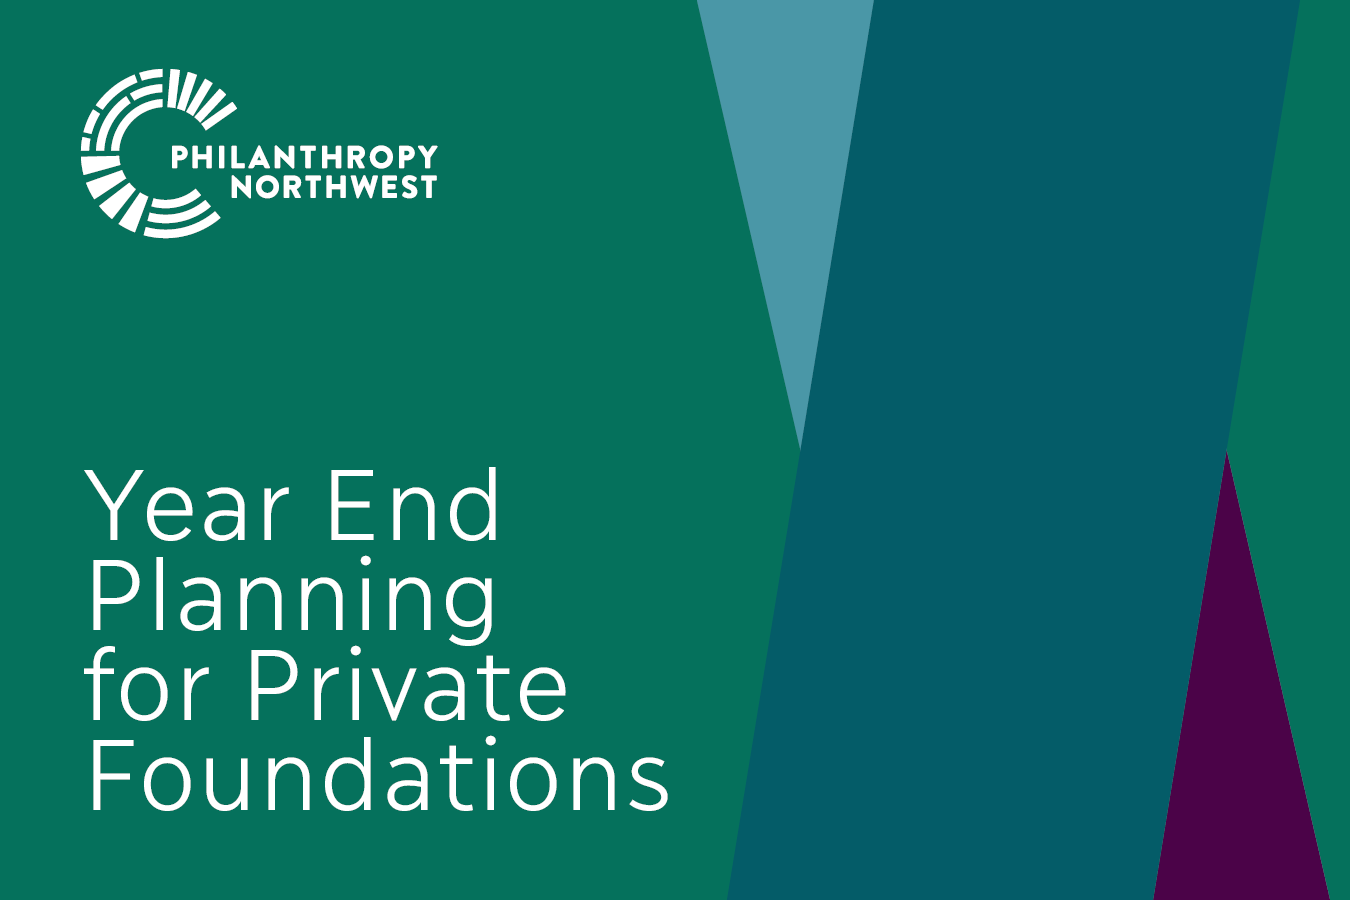 Pine green graphic that says "Year End Planning for Private Foundations" and has ocean blue, river blue and plum purple swooshes on the right side